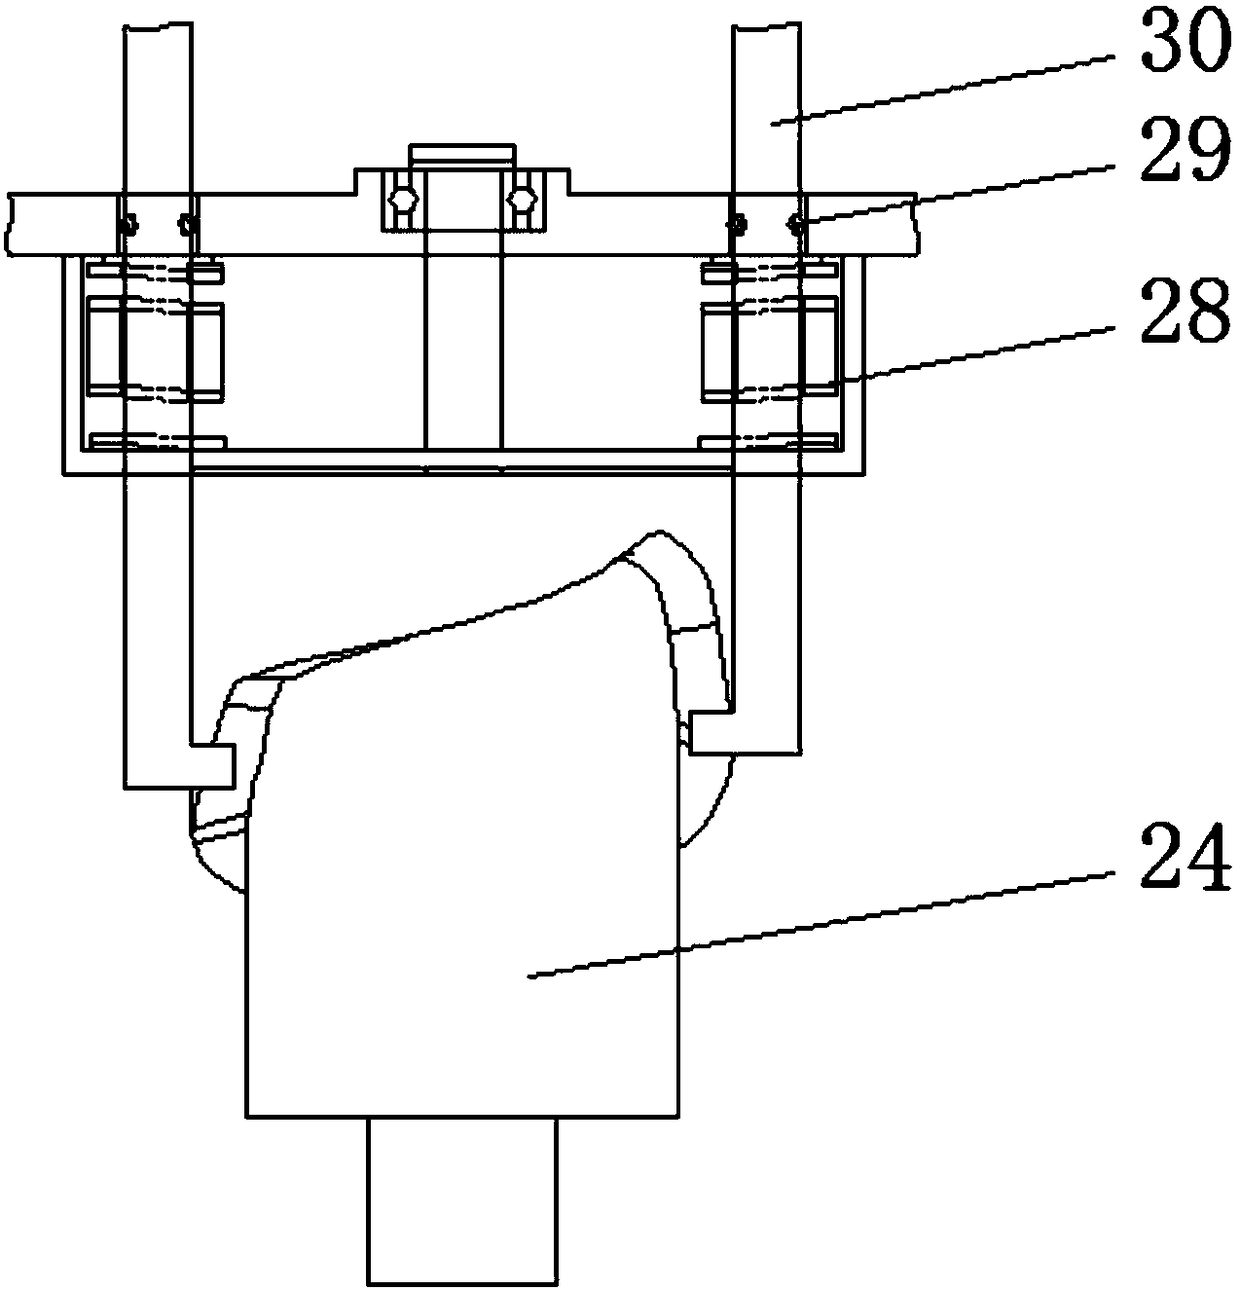 Filter element drying and sterilizing device